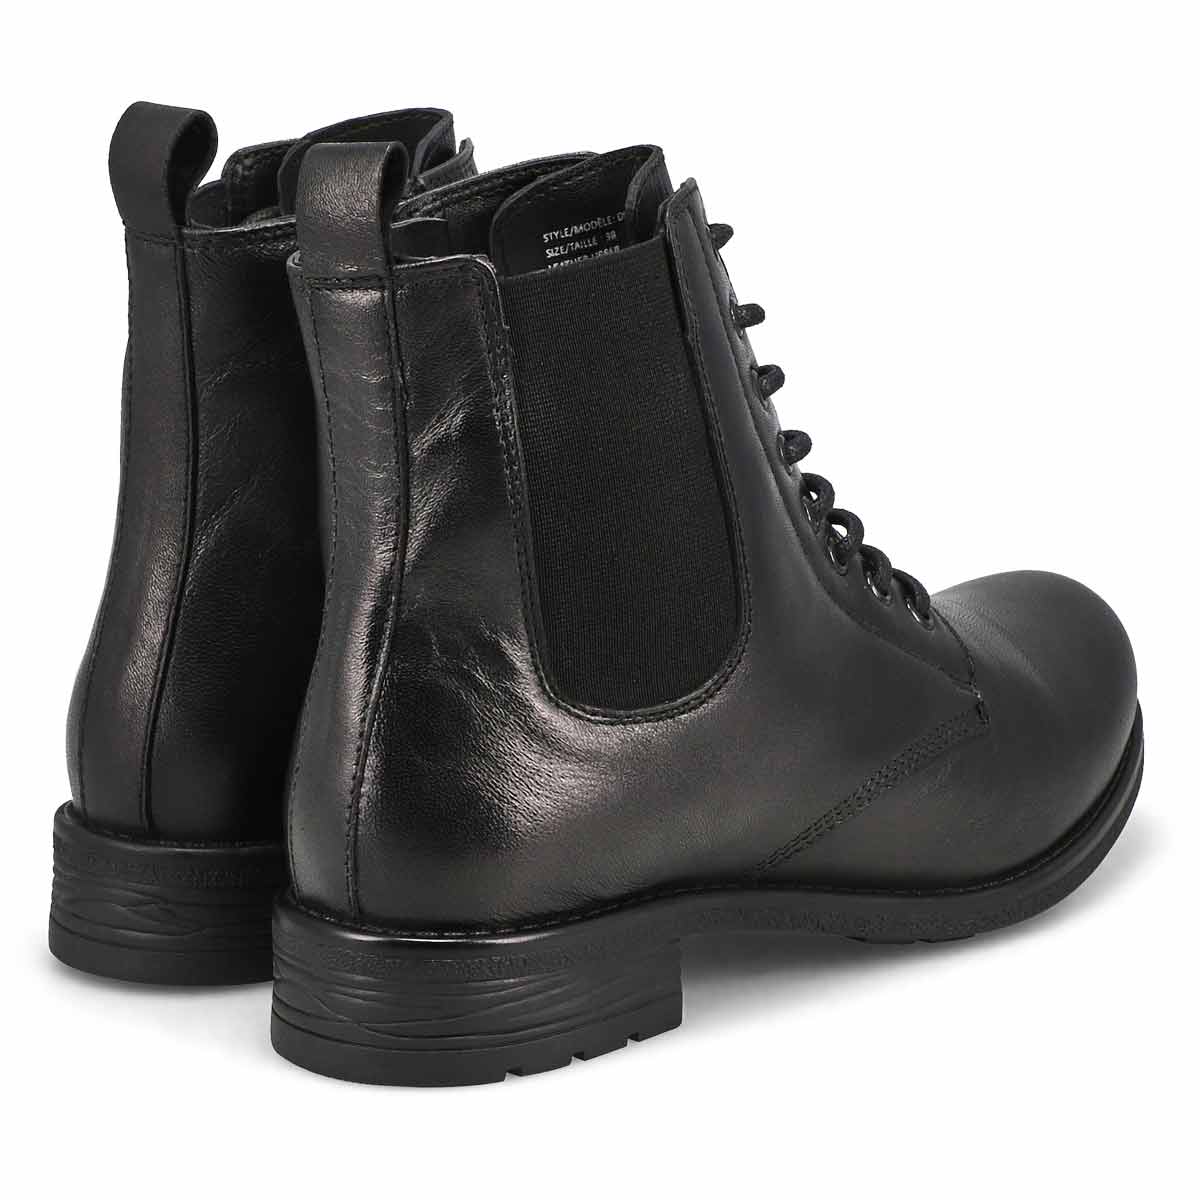 Women's Diana Leather Lace Up Zip Boot - Black